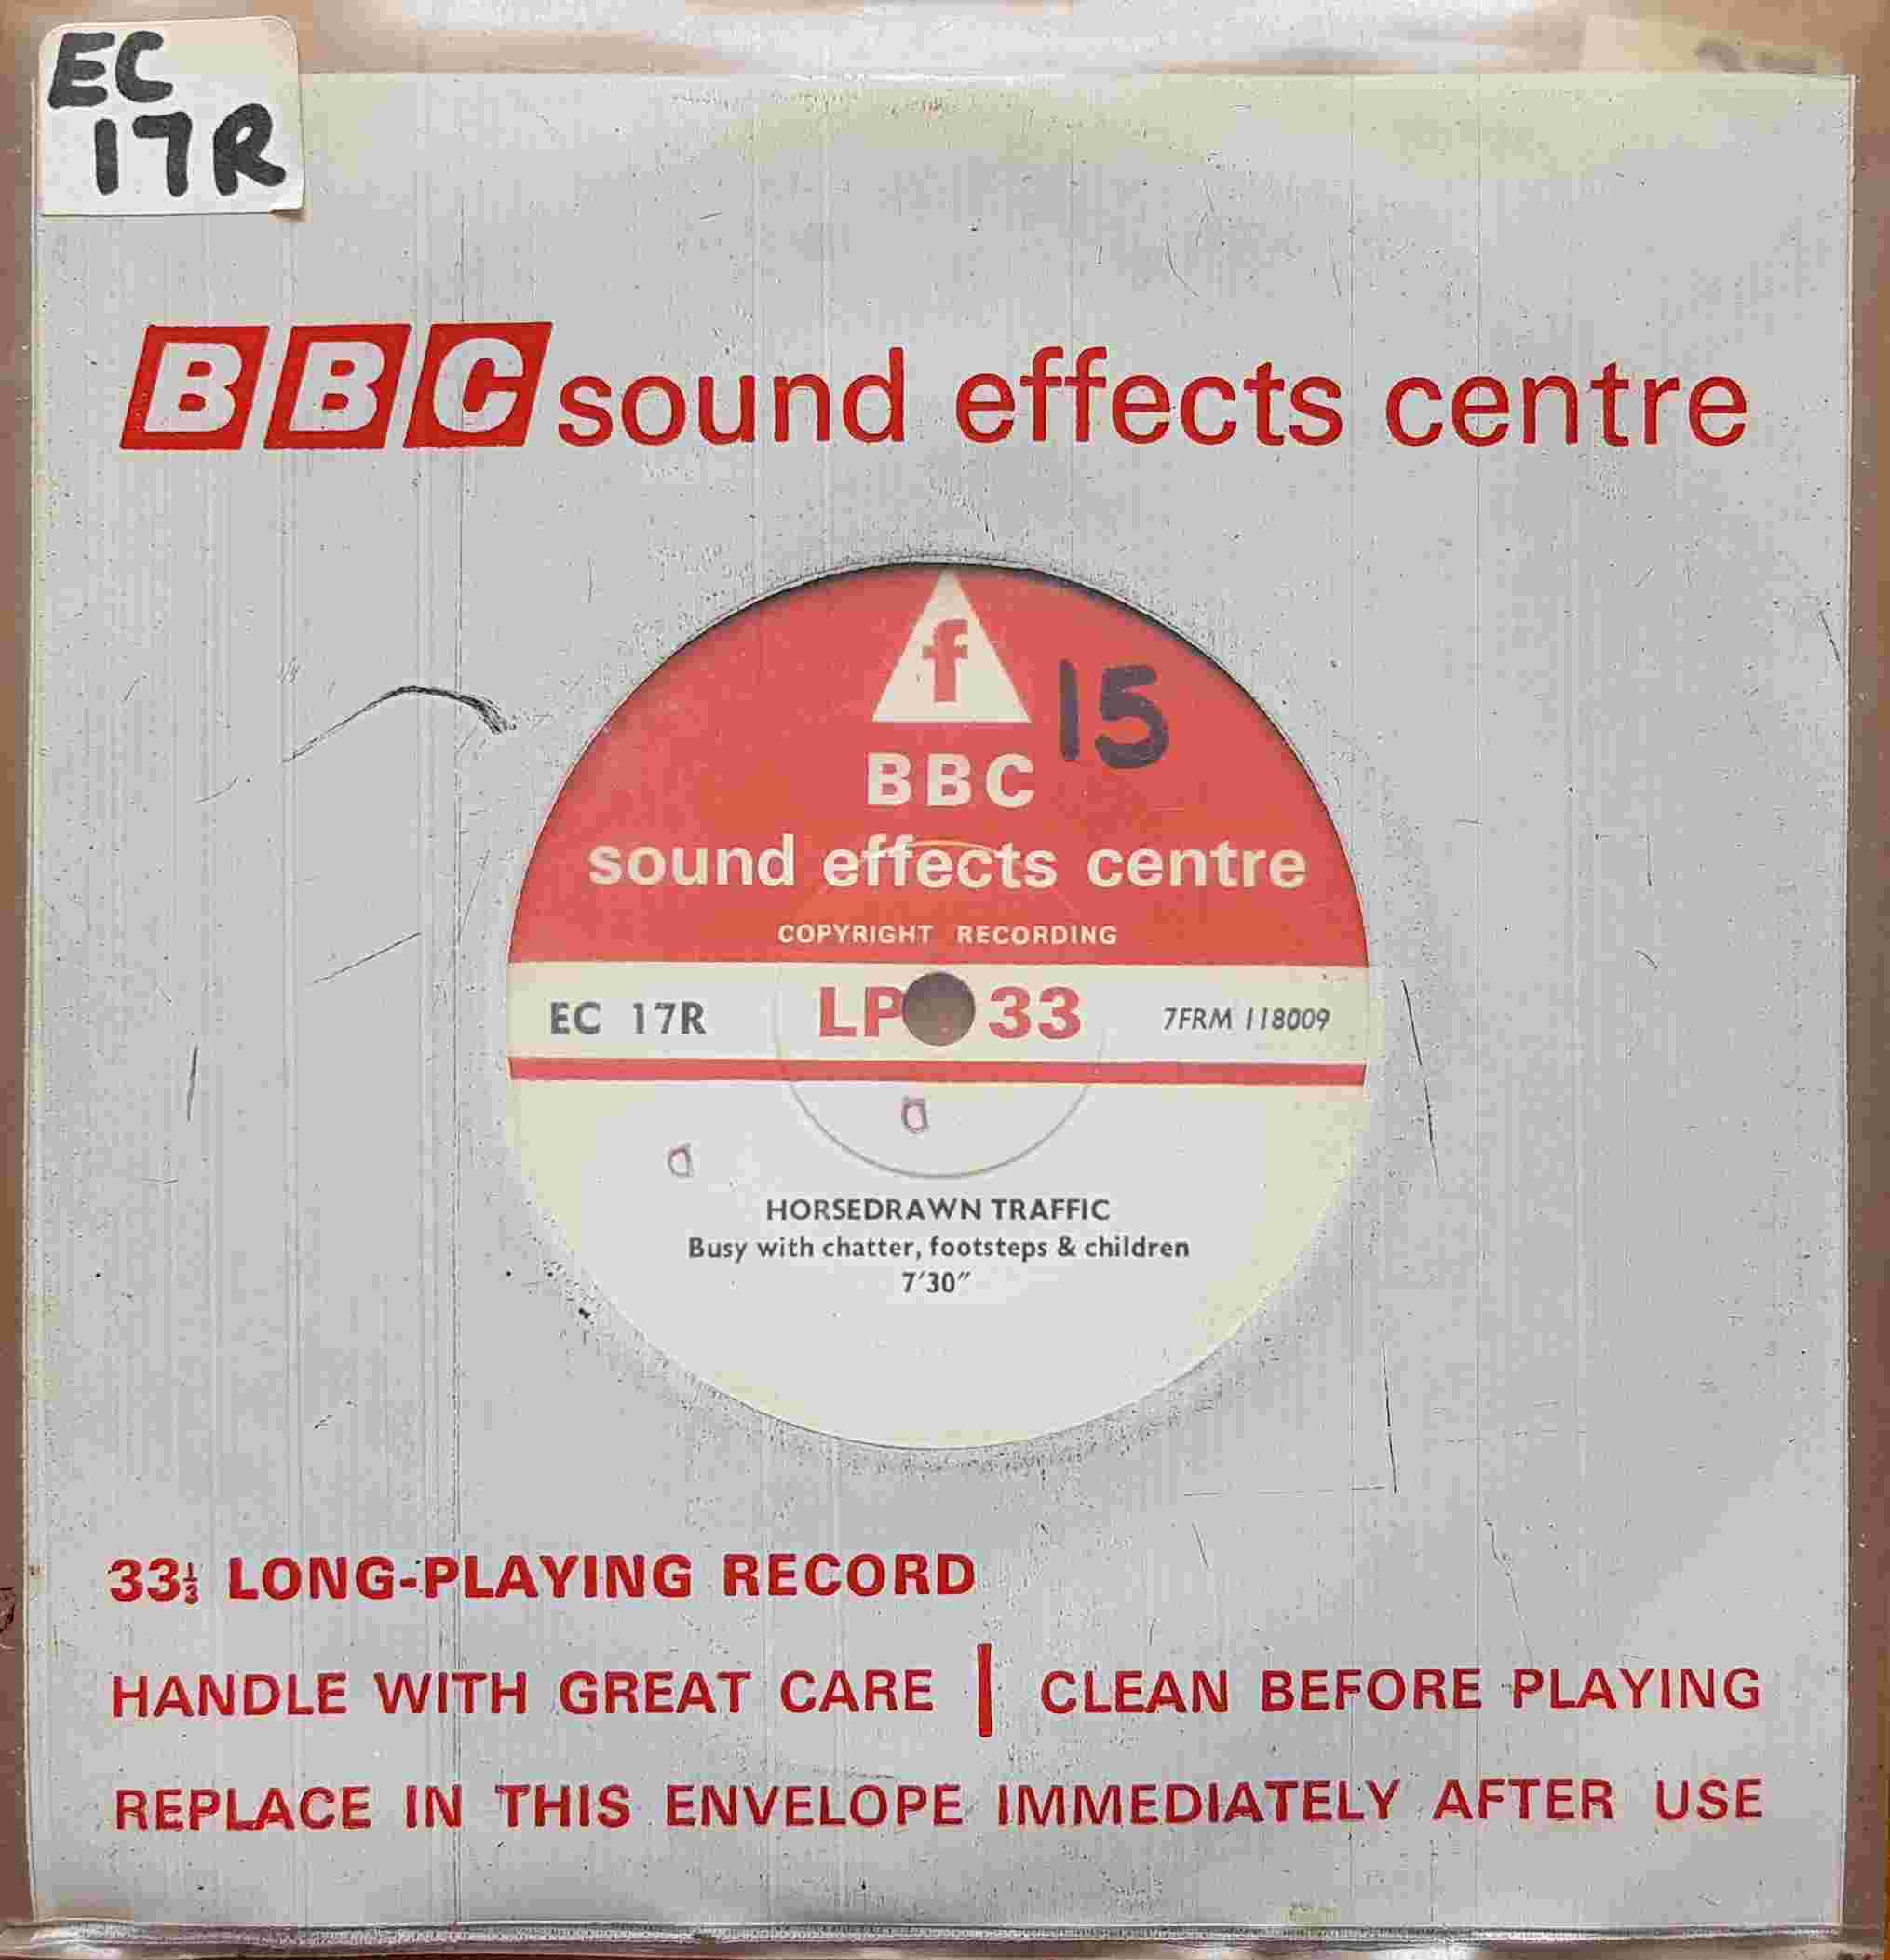 Picture of EC 17R Horsedrawn traffic by artist Not registered from the BBC singles - Records and Tapes library